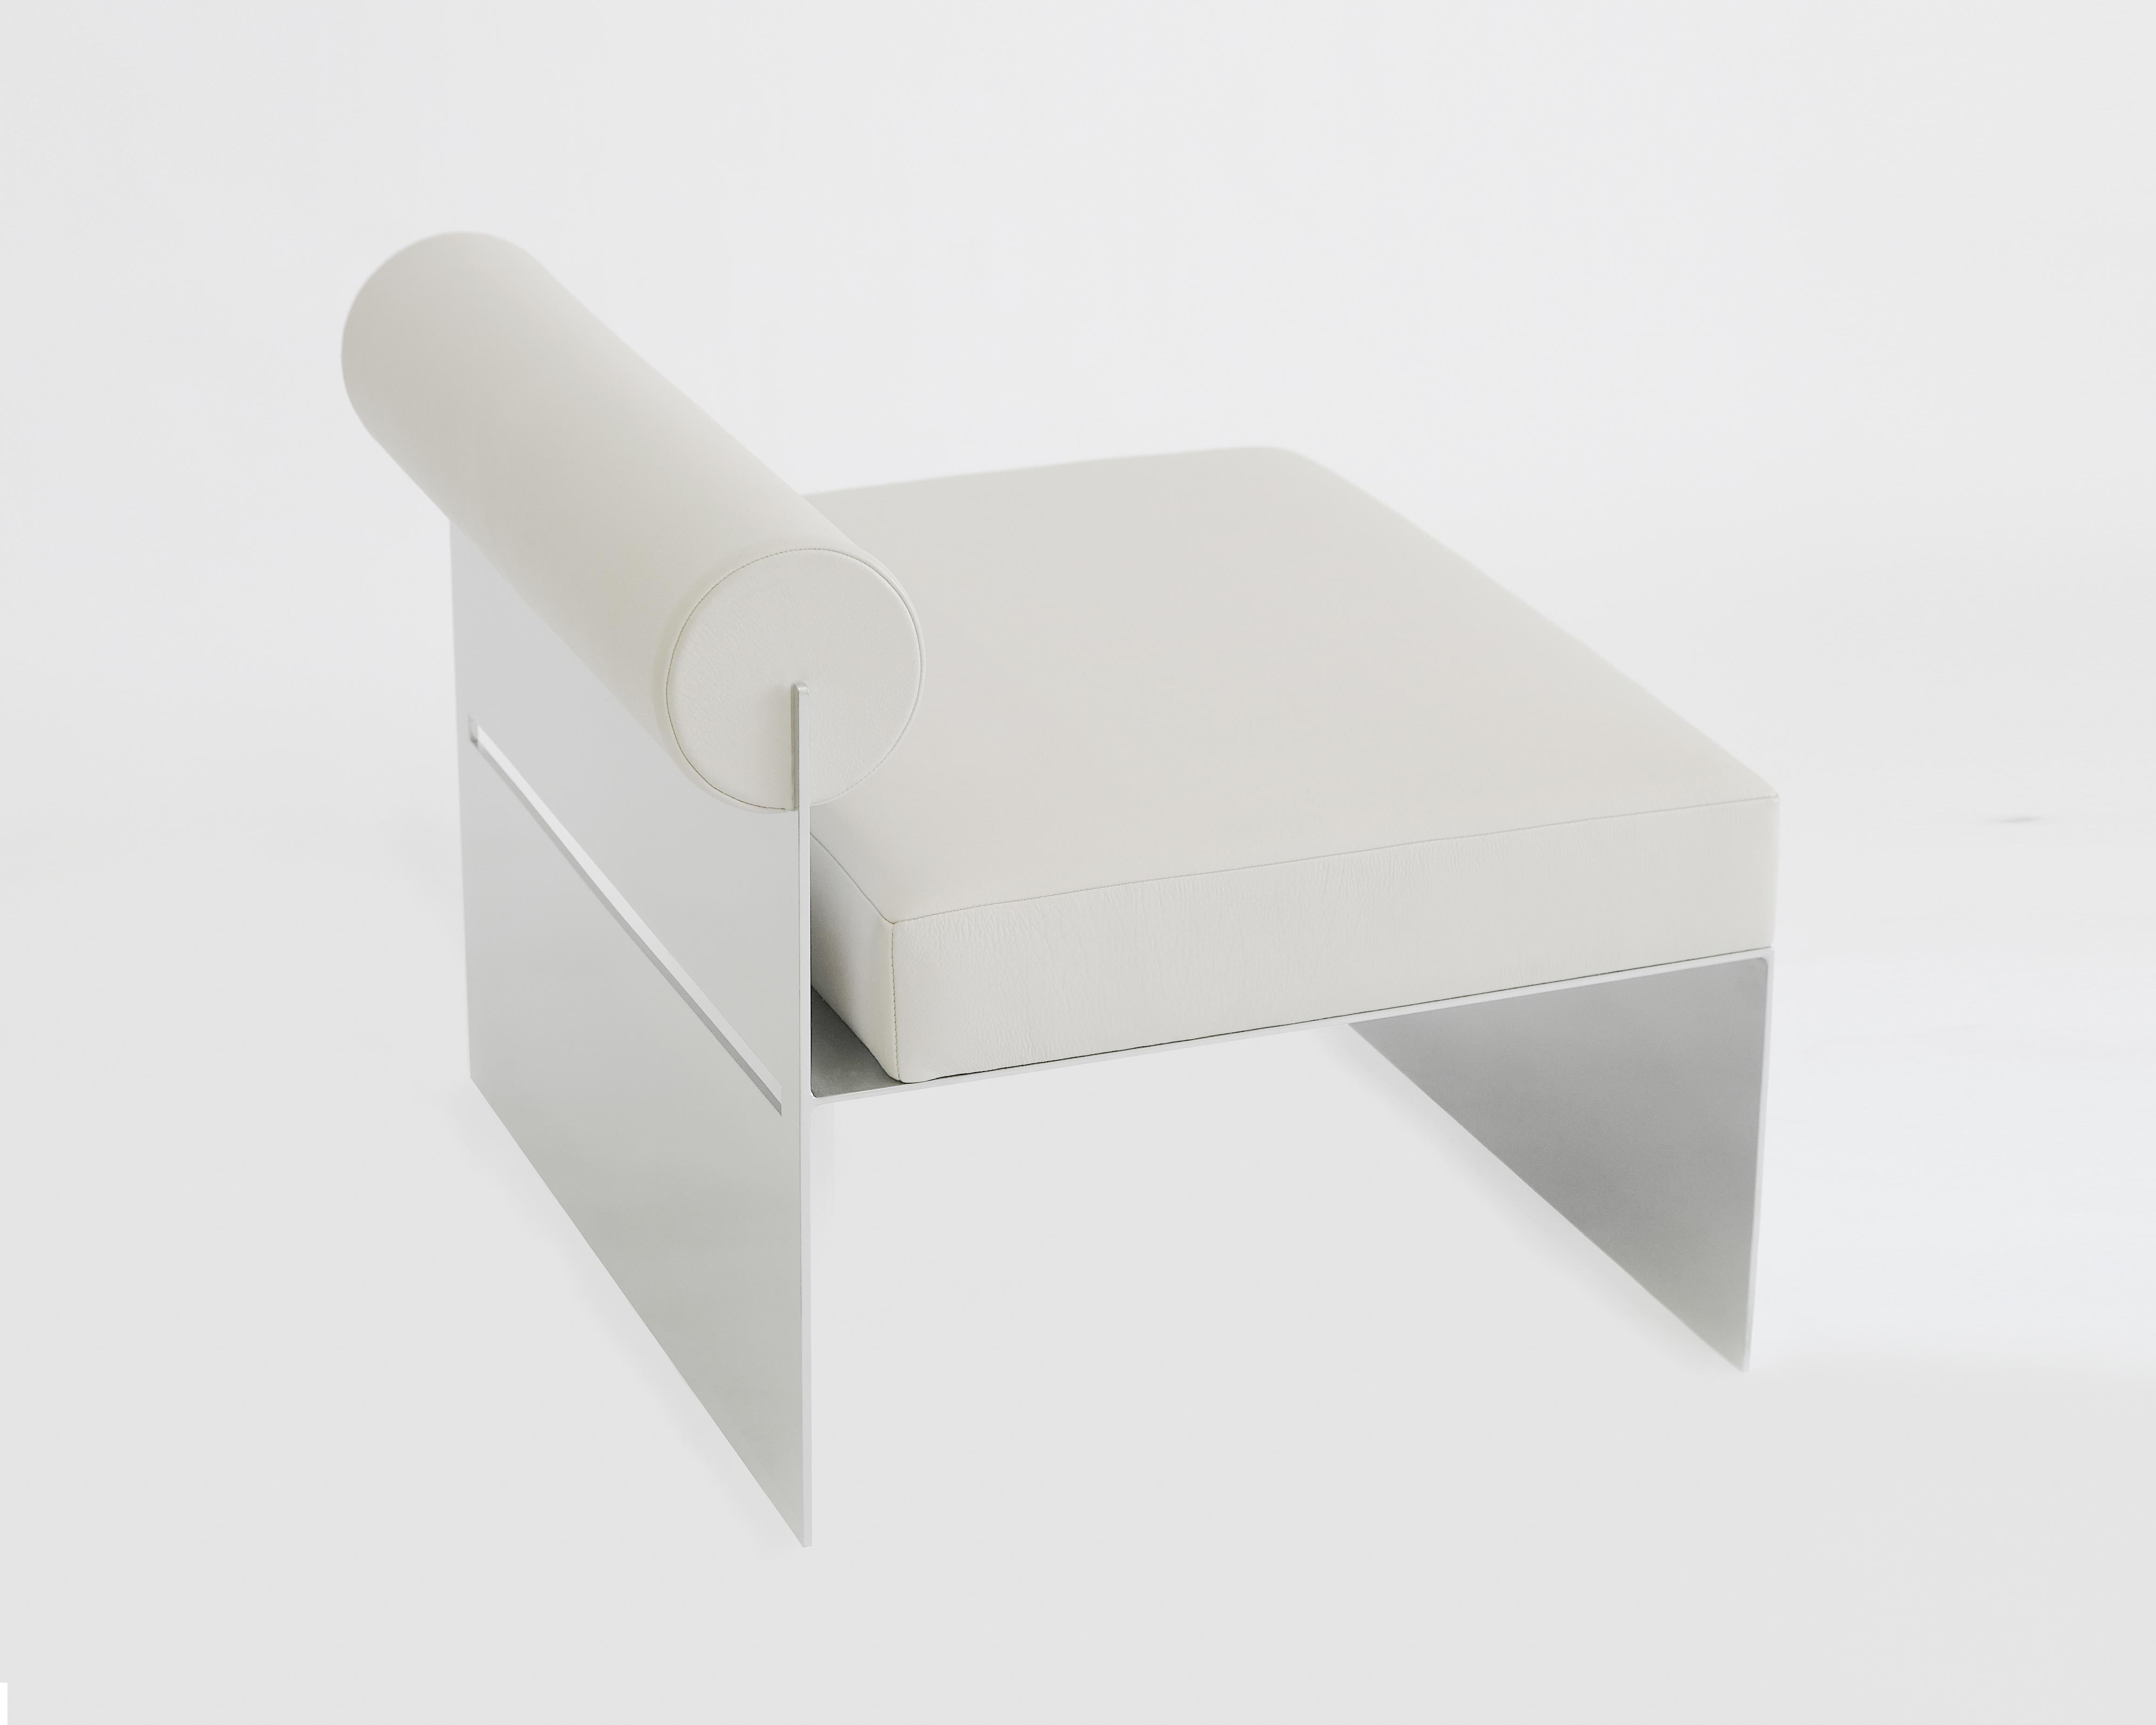 Building blocks lounge chair by Jialun Xiong
Dimensions: 28”W x 25”D x 25”H inch
Materials: Metal and off-white leather

COM/COL Option Available.

“ I have an aptitude for exploring the nuances of infinite combination of materials. I’m always